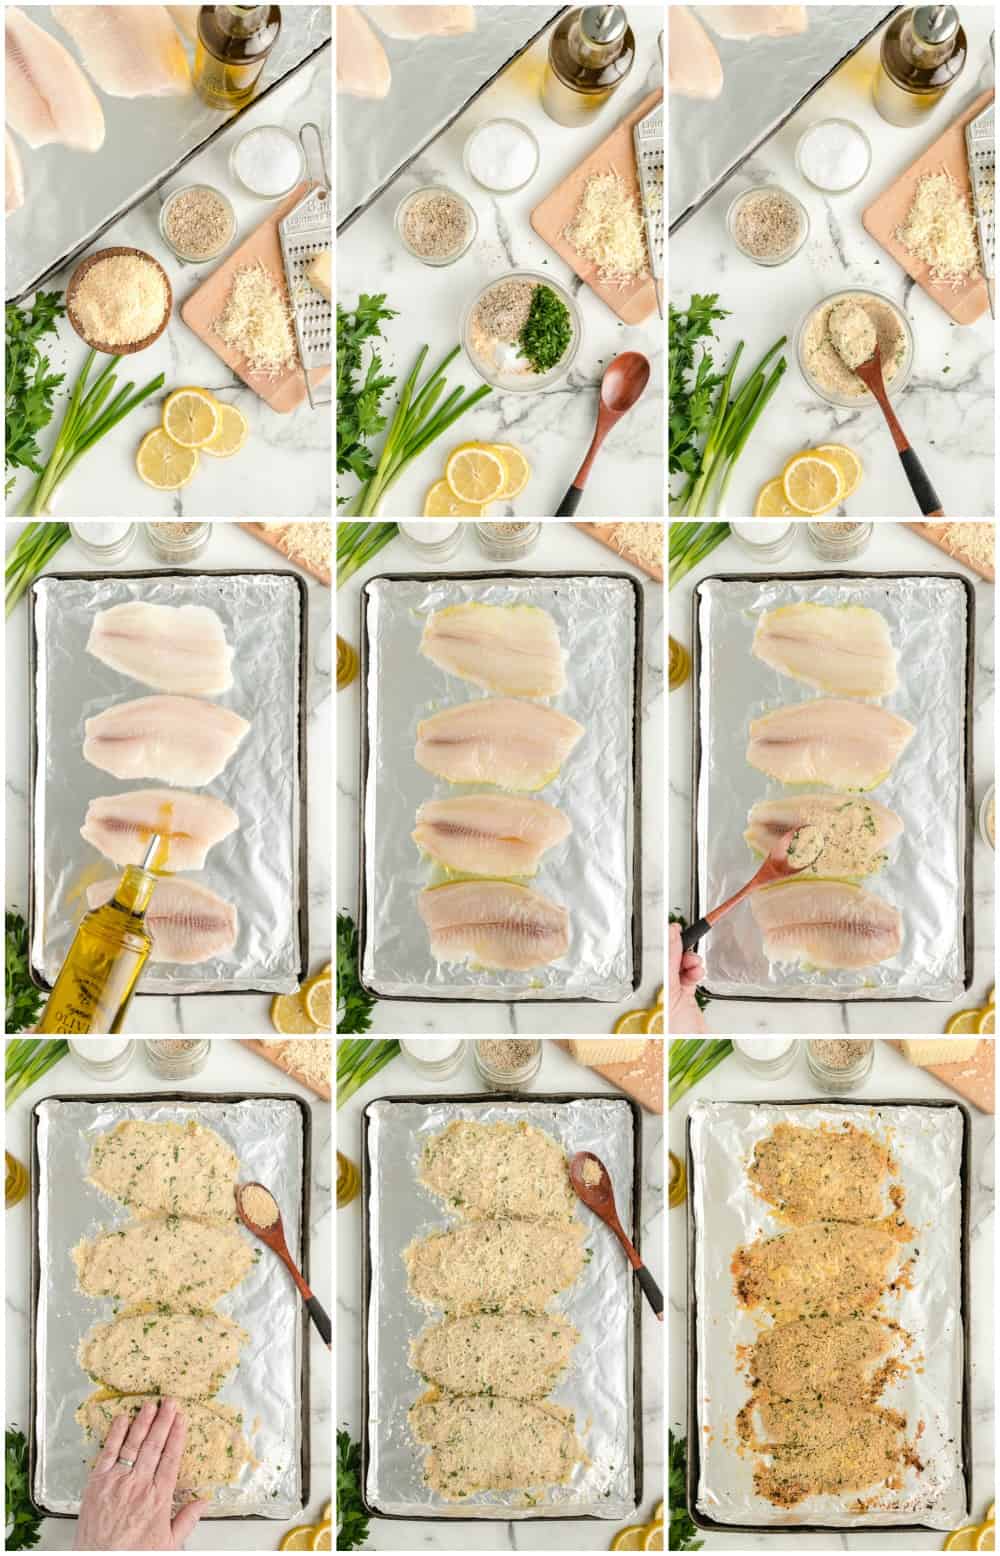 how to make parmesan crusted tilapia: step by step photos of making baked tilapia